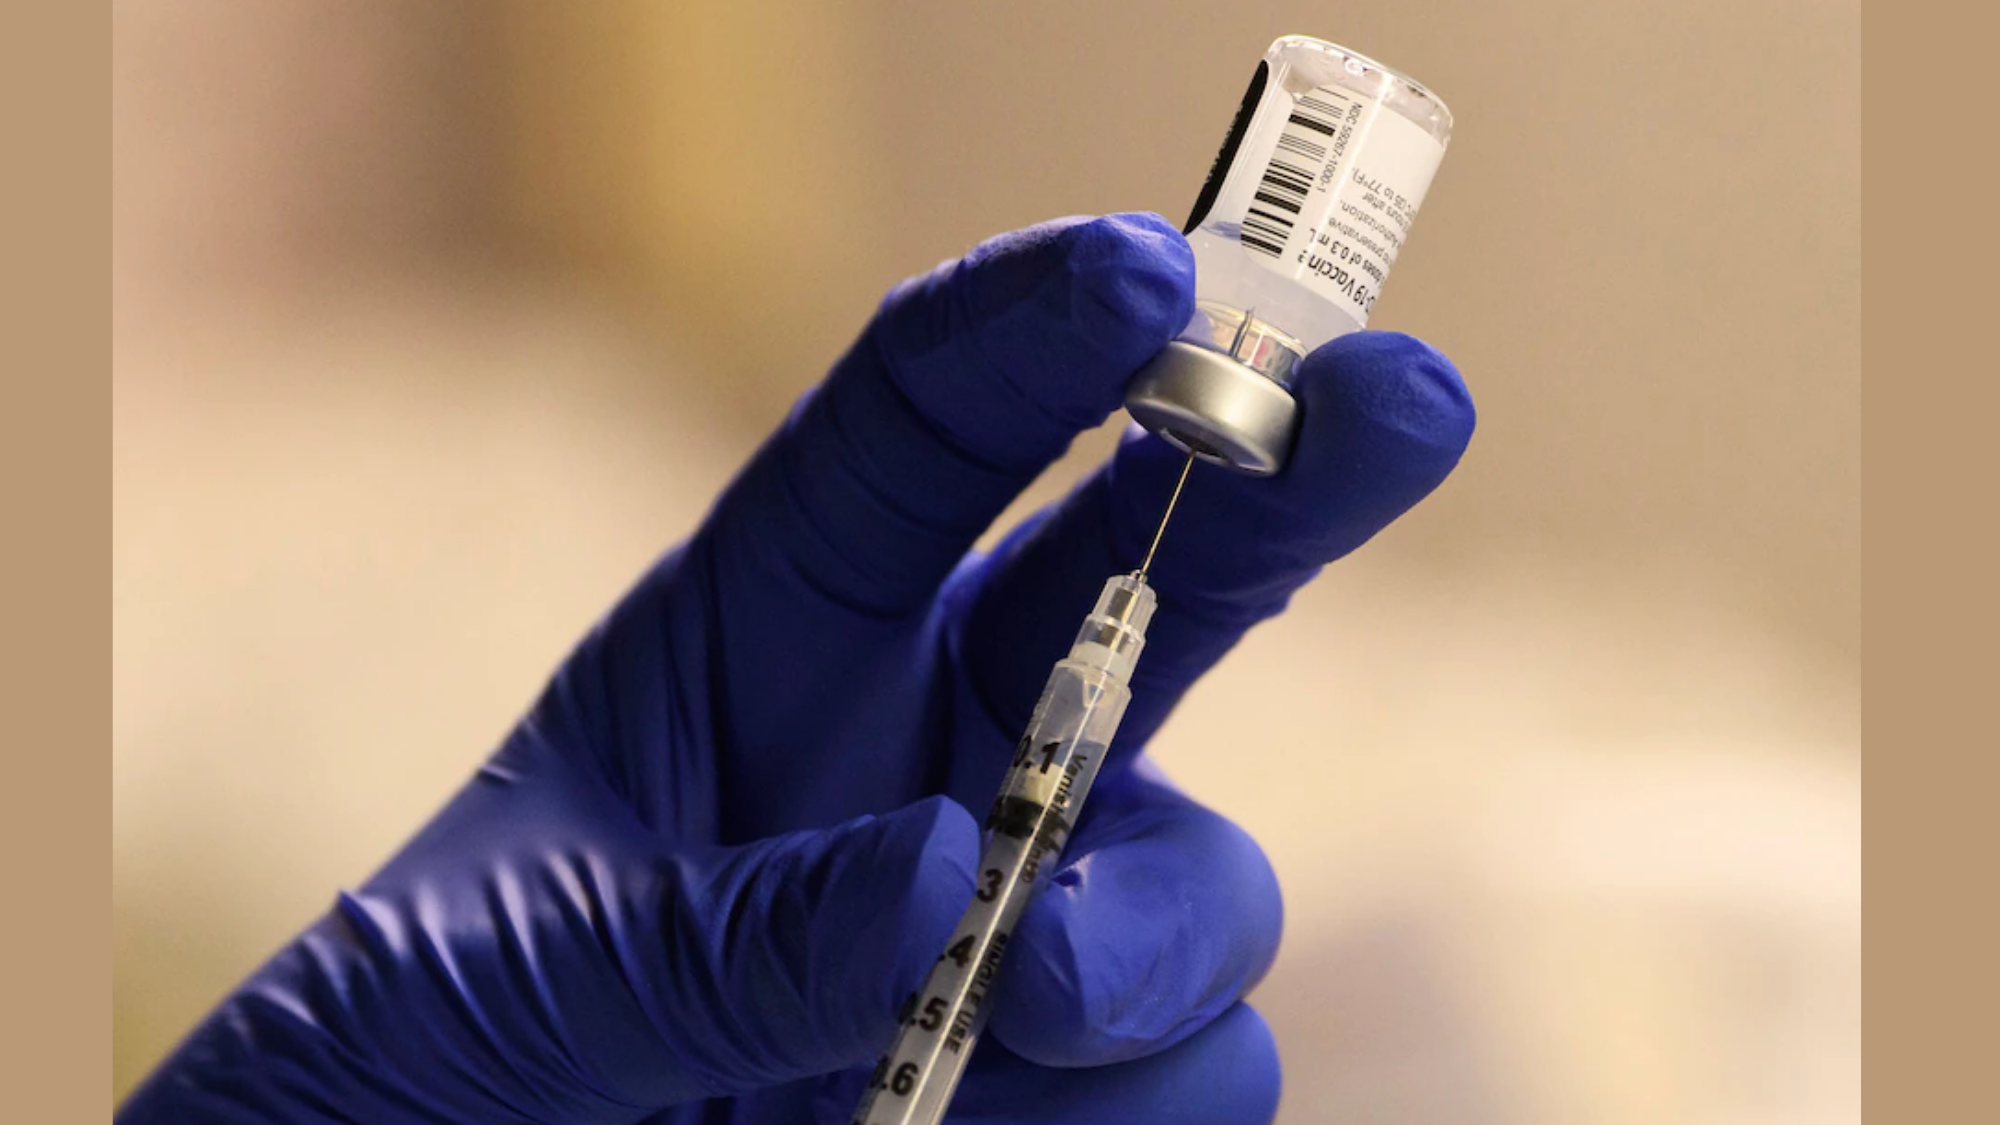 Slow Covid vaccination to cost global economy $2.3 trillion photo from ABS-CBN News